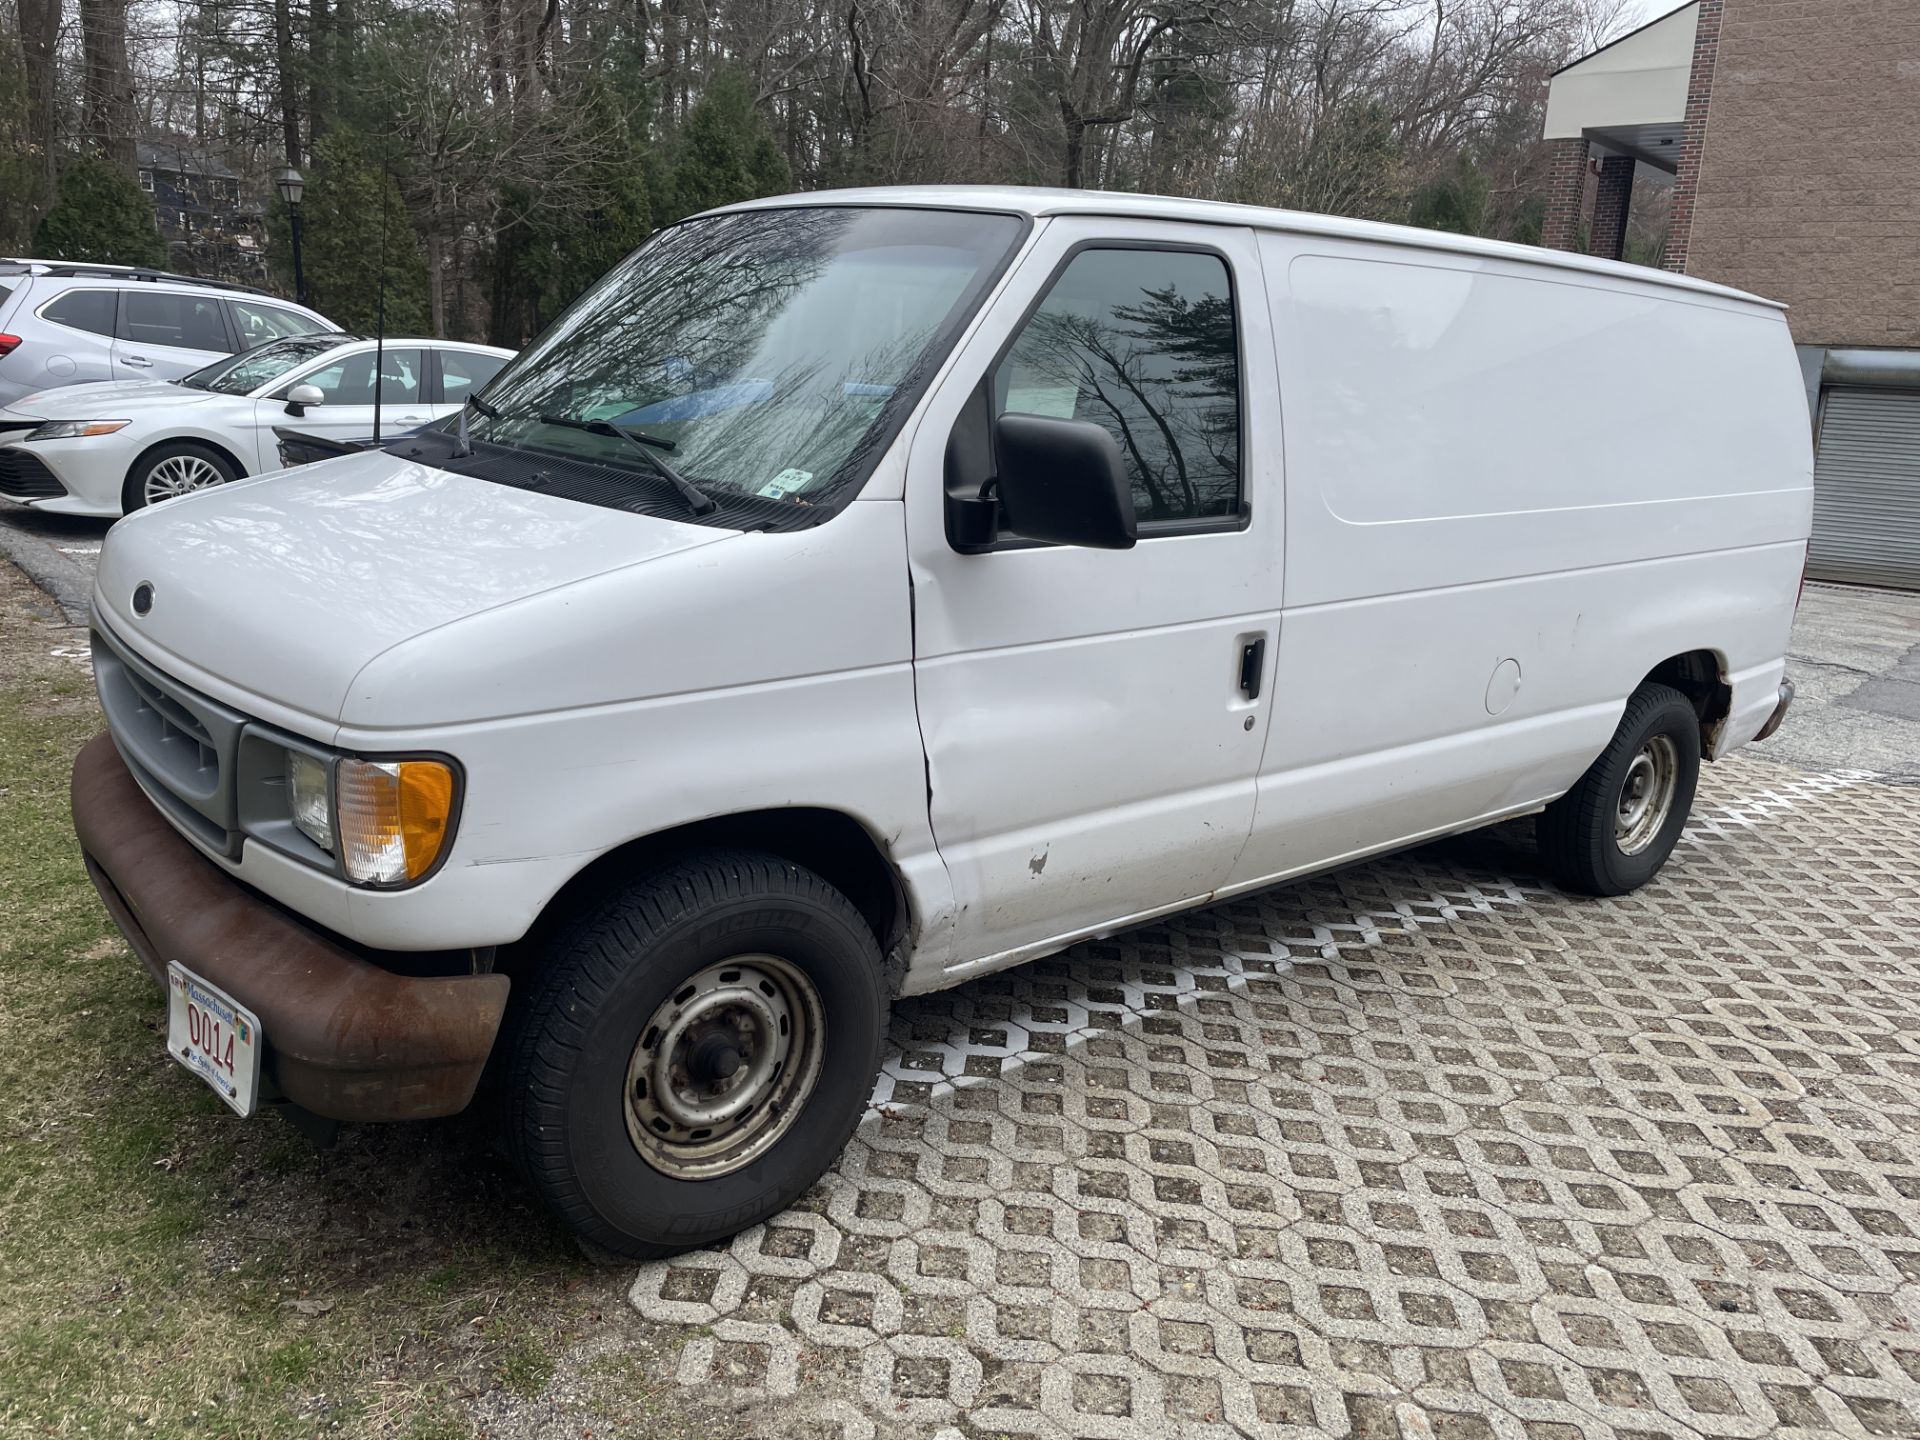 2001 Ford Ecovan Odom:159,889 VIN:1FTRE14241HB51789 (THIS UNIT CAN'T BE REMOVED UNTIL APRIL 30, 2024